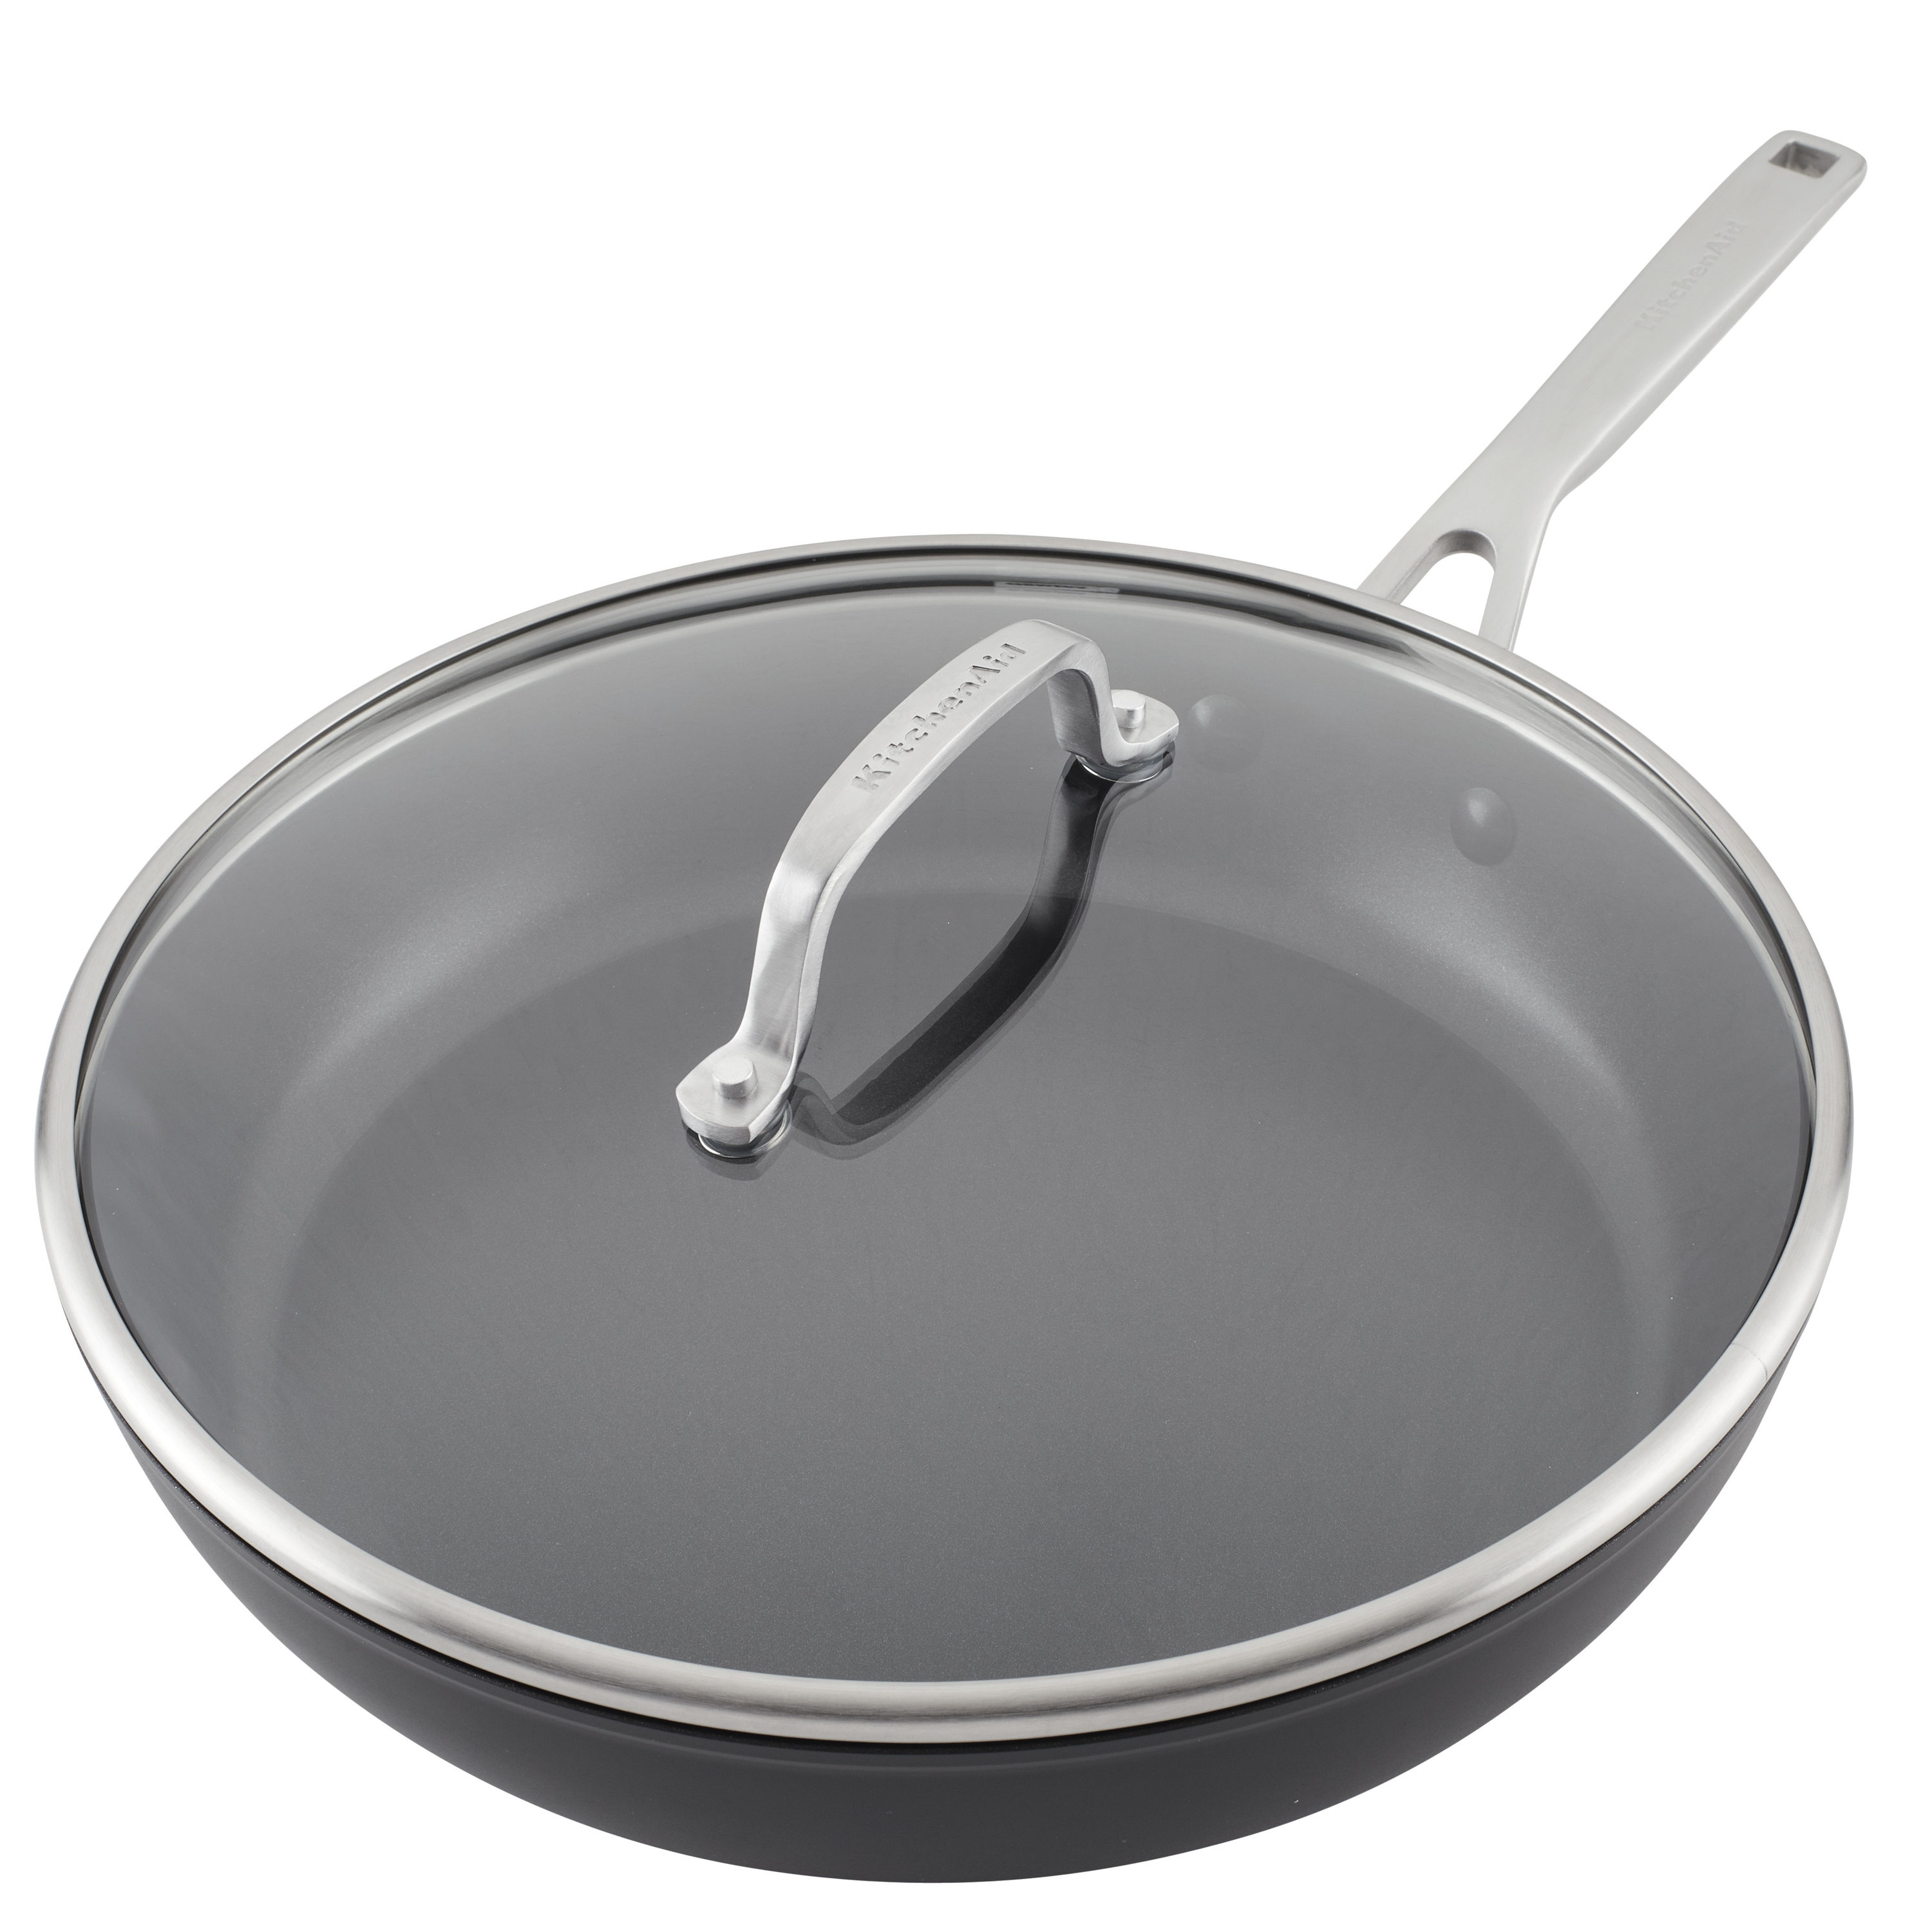 KitchenAid Hard-Anodized Induction Nonstick Square Grill Pan, 11.25-Inch,  Matte Black